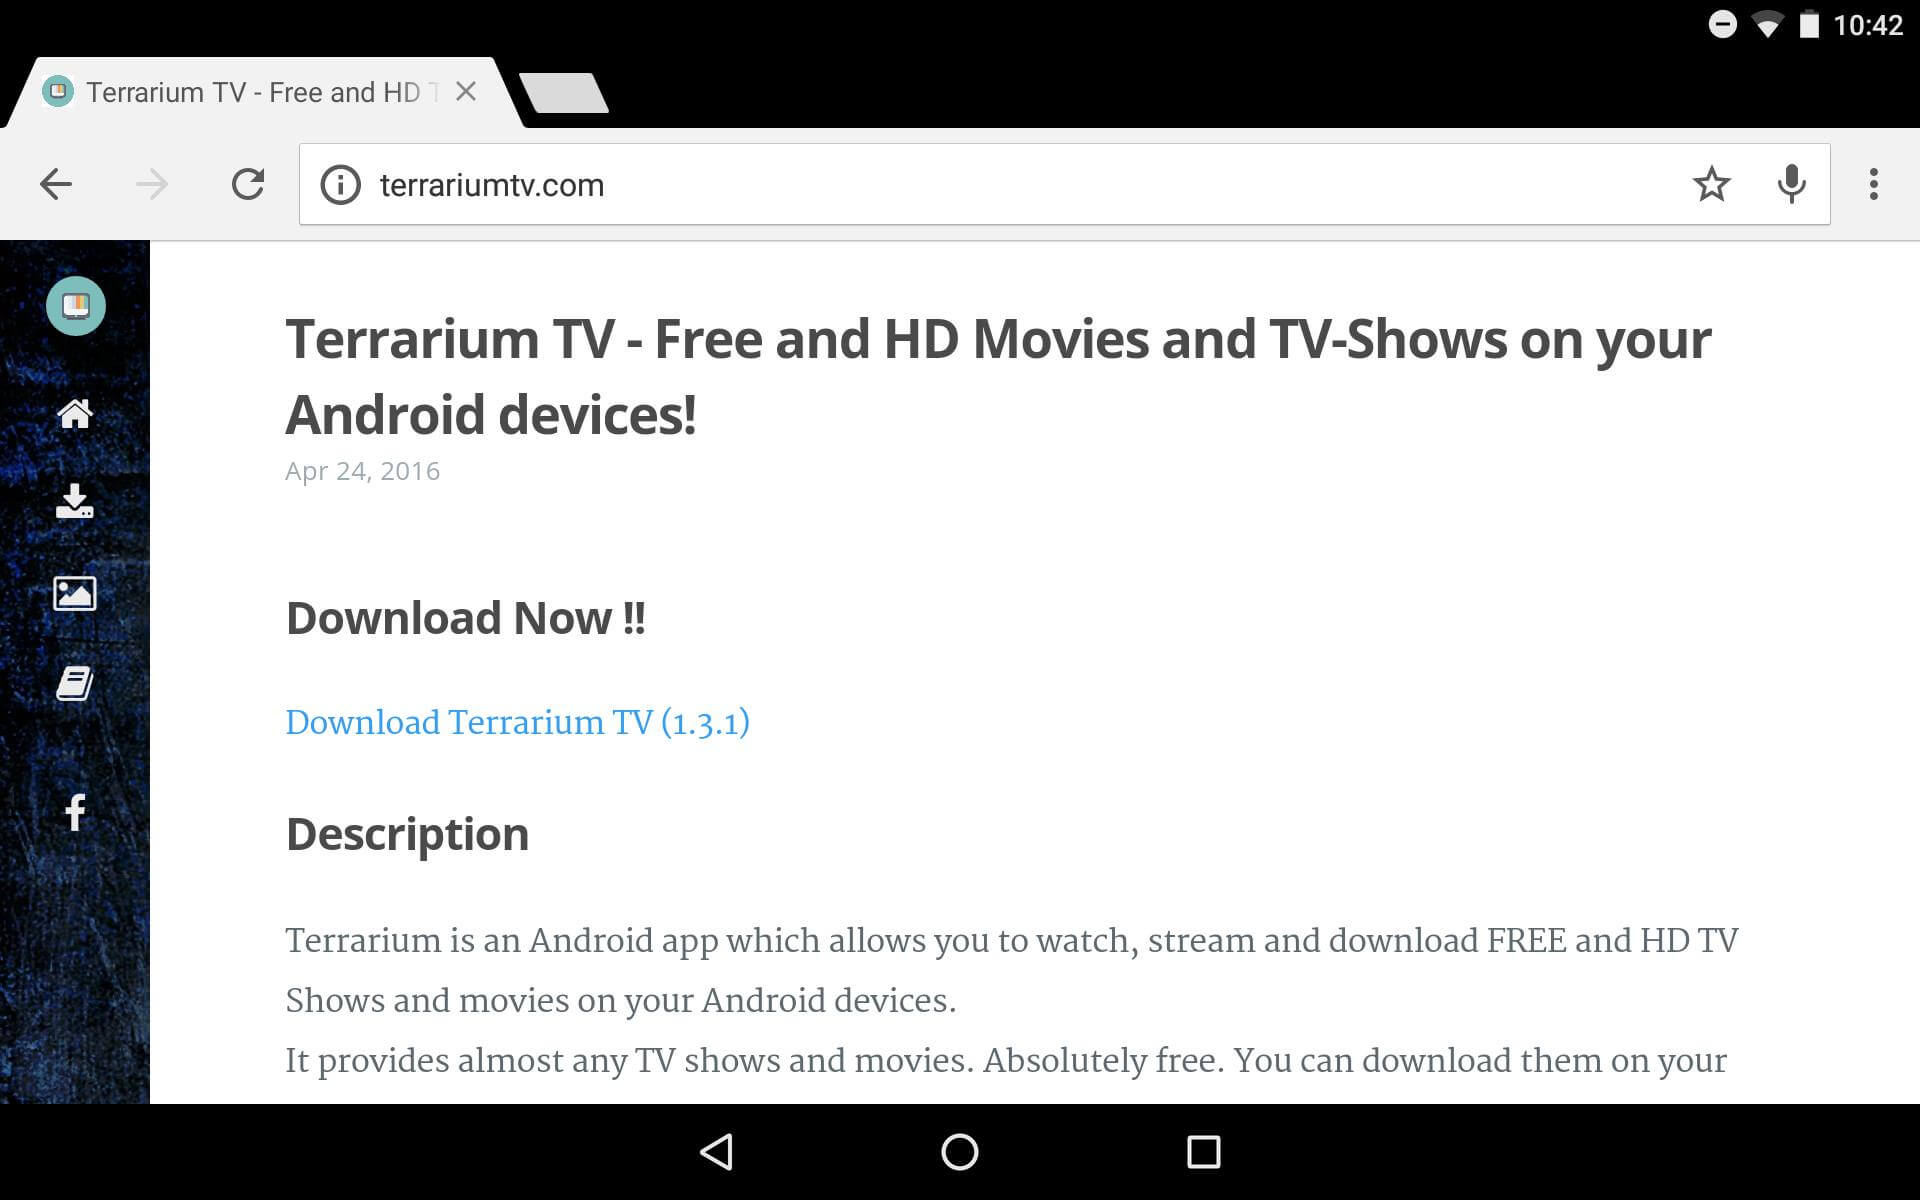 Tidlig Akrobatik Parlament Guide: How to install Terrarium TV on your Android device | SHB